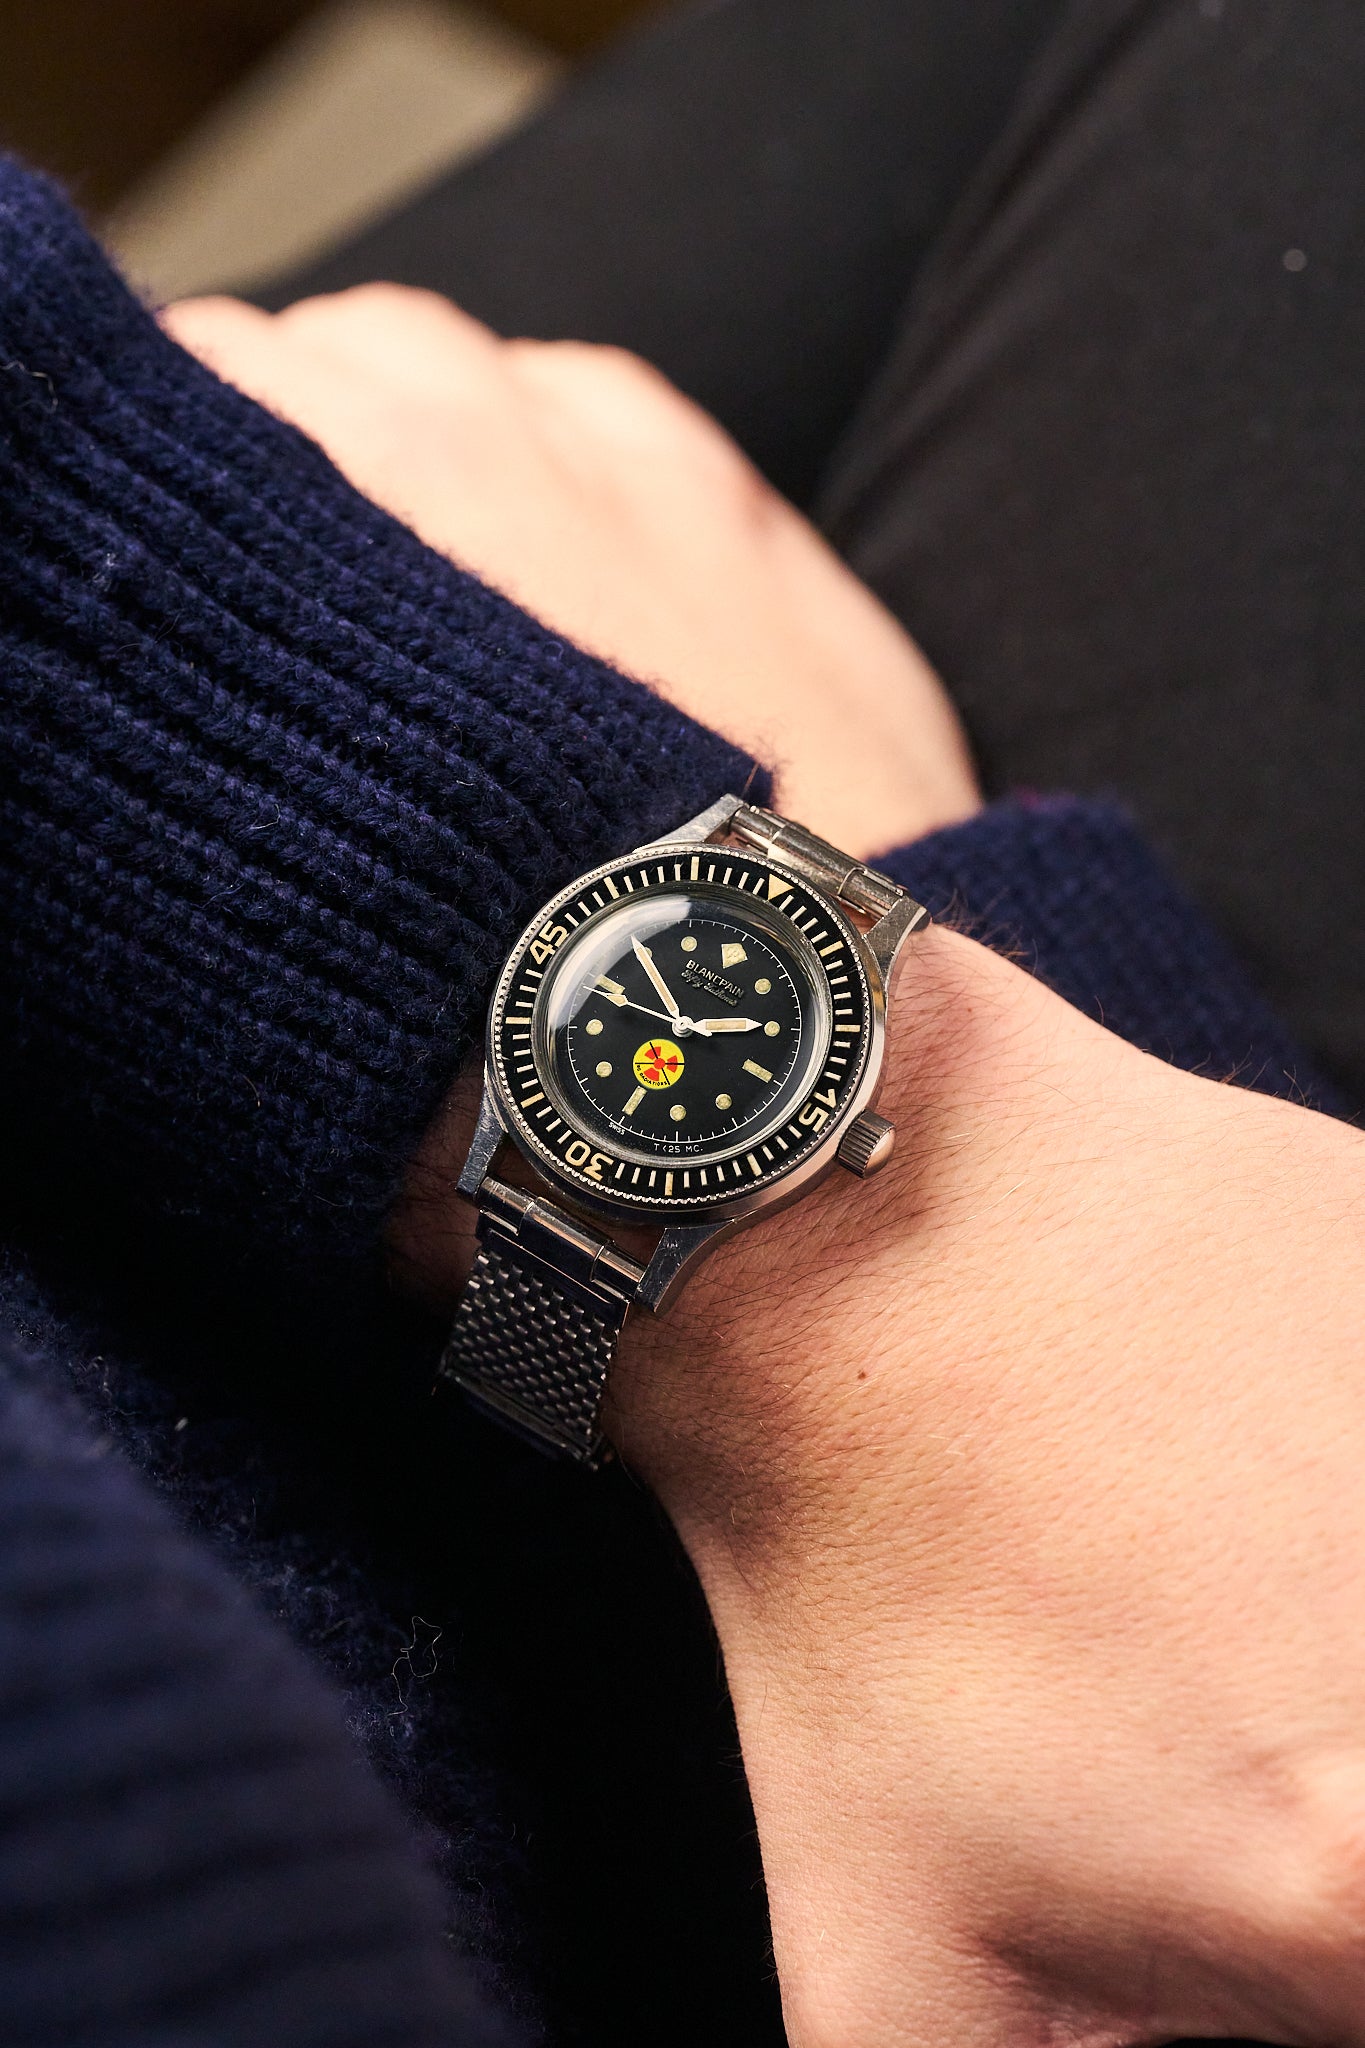 BLANCPAIN FIFTY FATHOMS 'NO RADIATIONS' MILITARY ISSUED